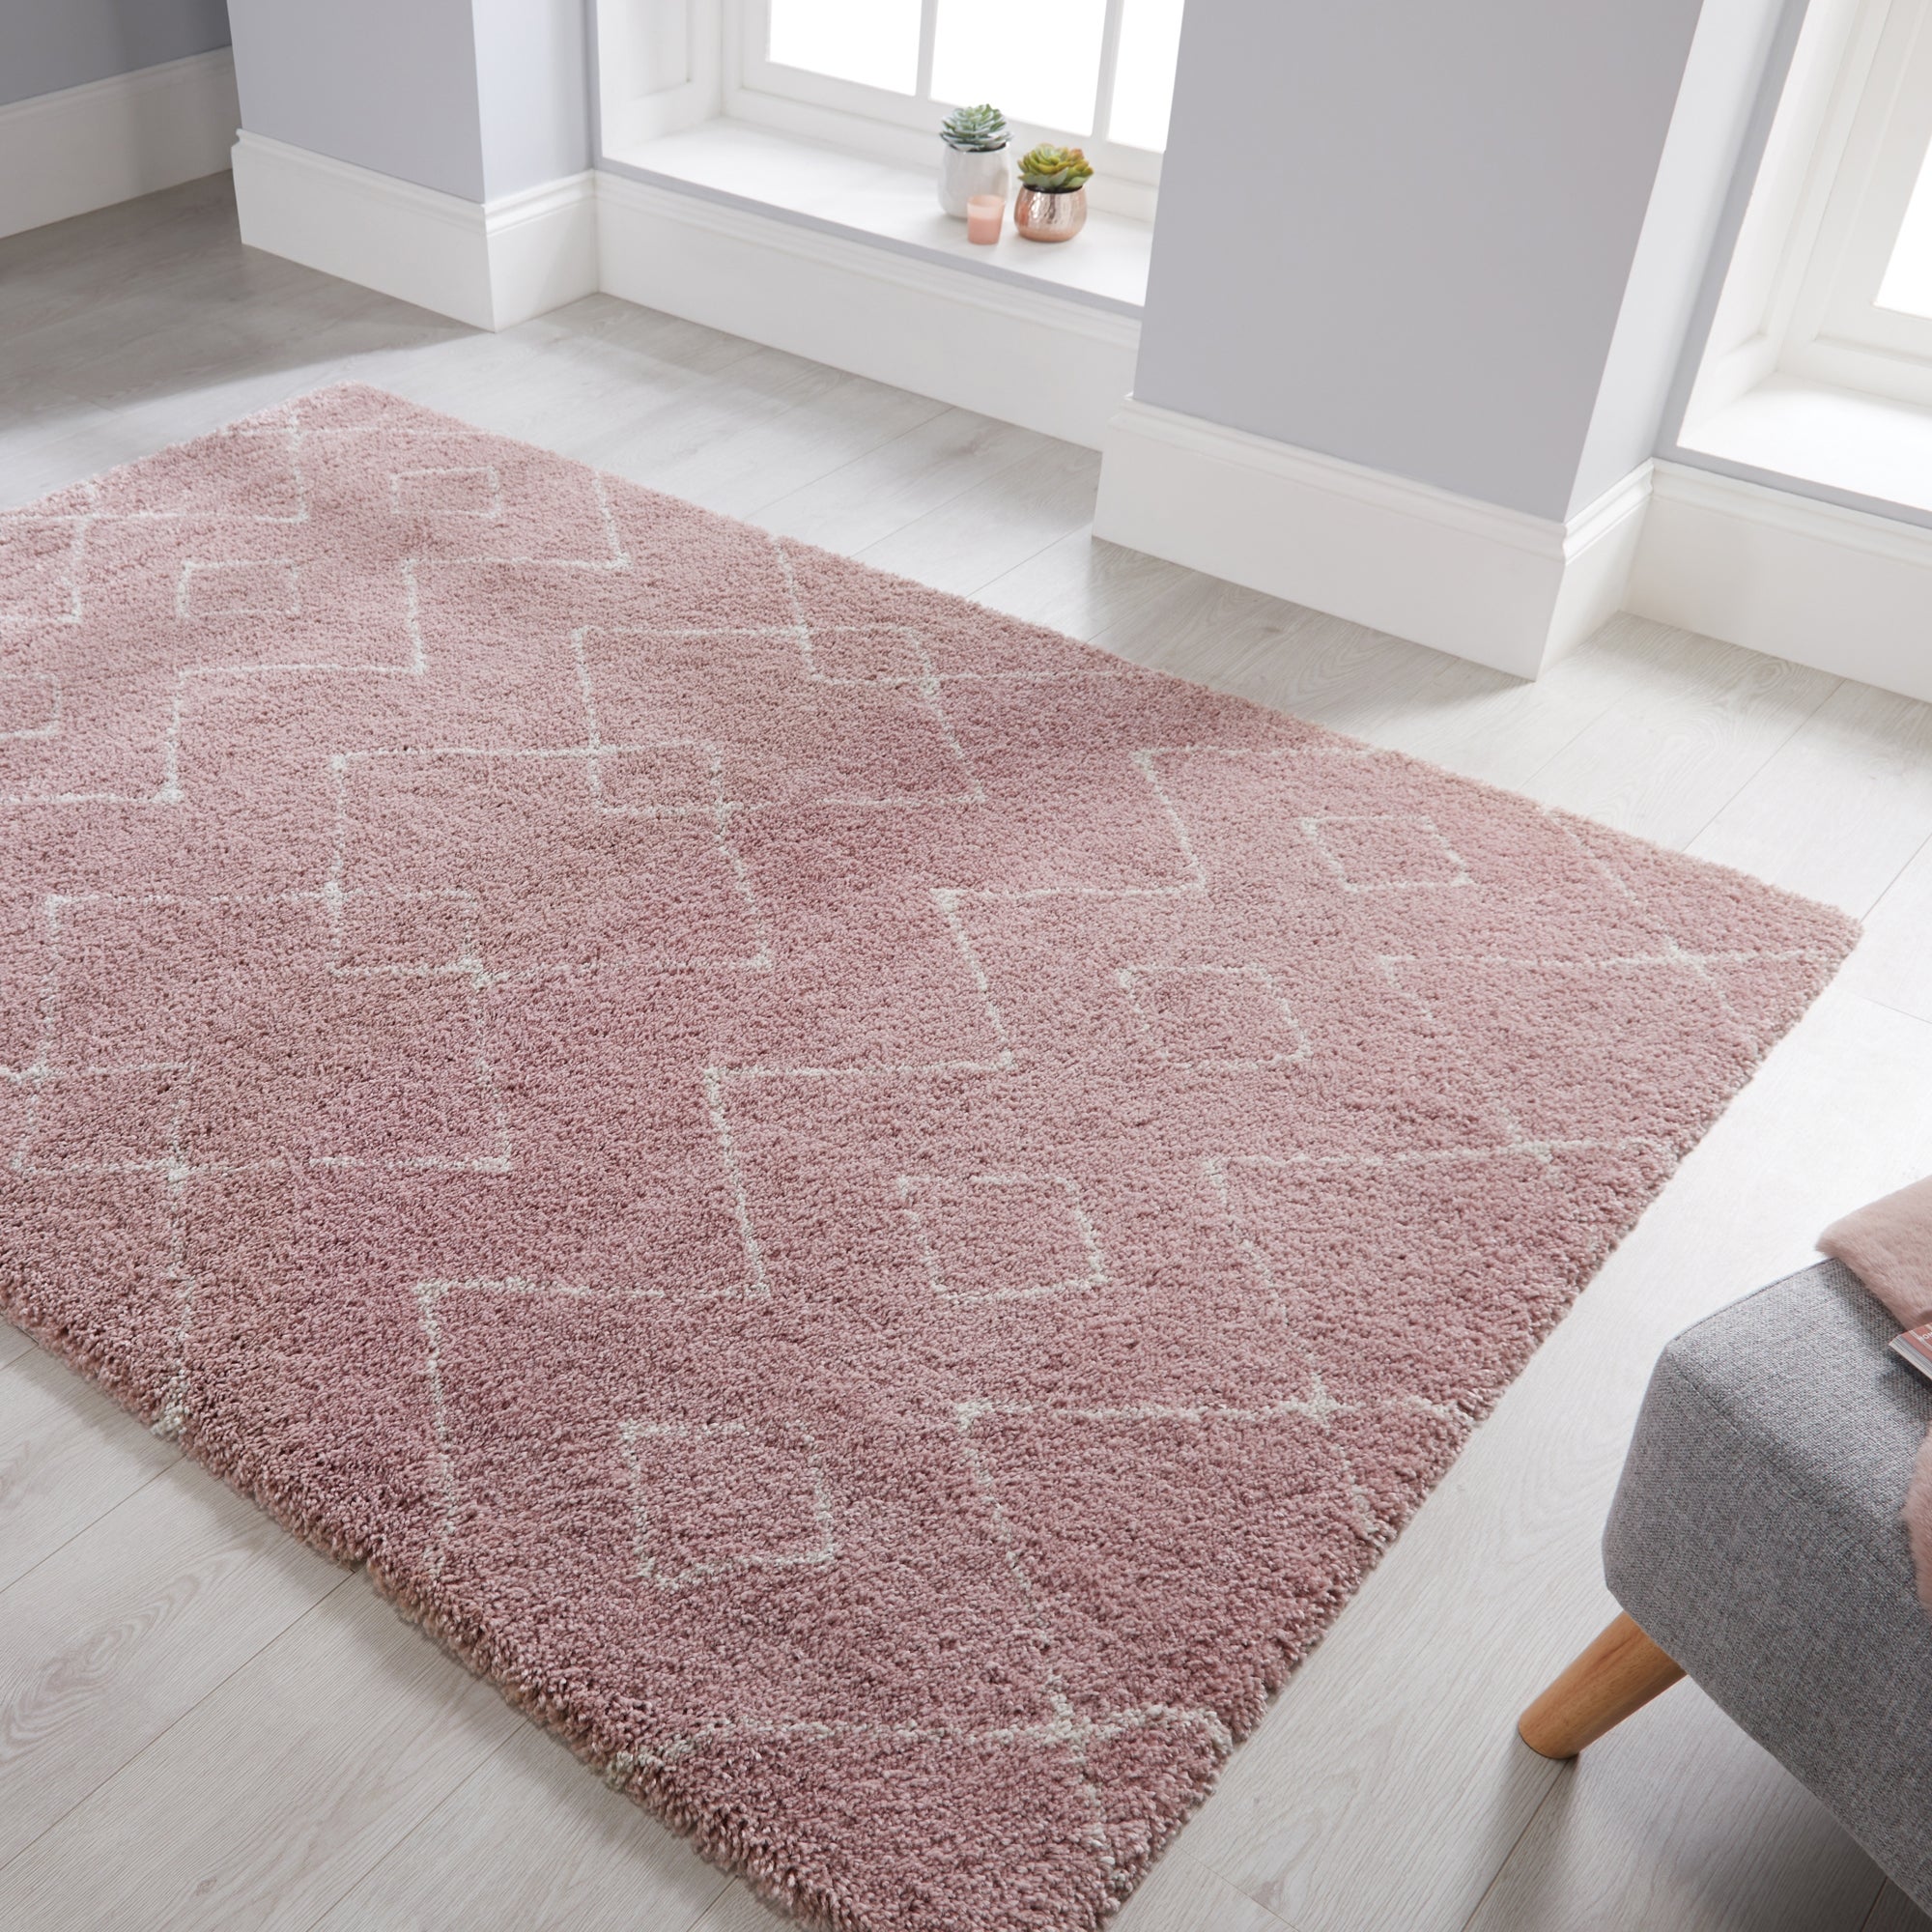 Floral Spray Rug Dunelm Mill Rugs Modern Rugs Family Room Inspiration